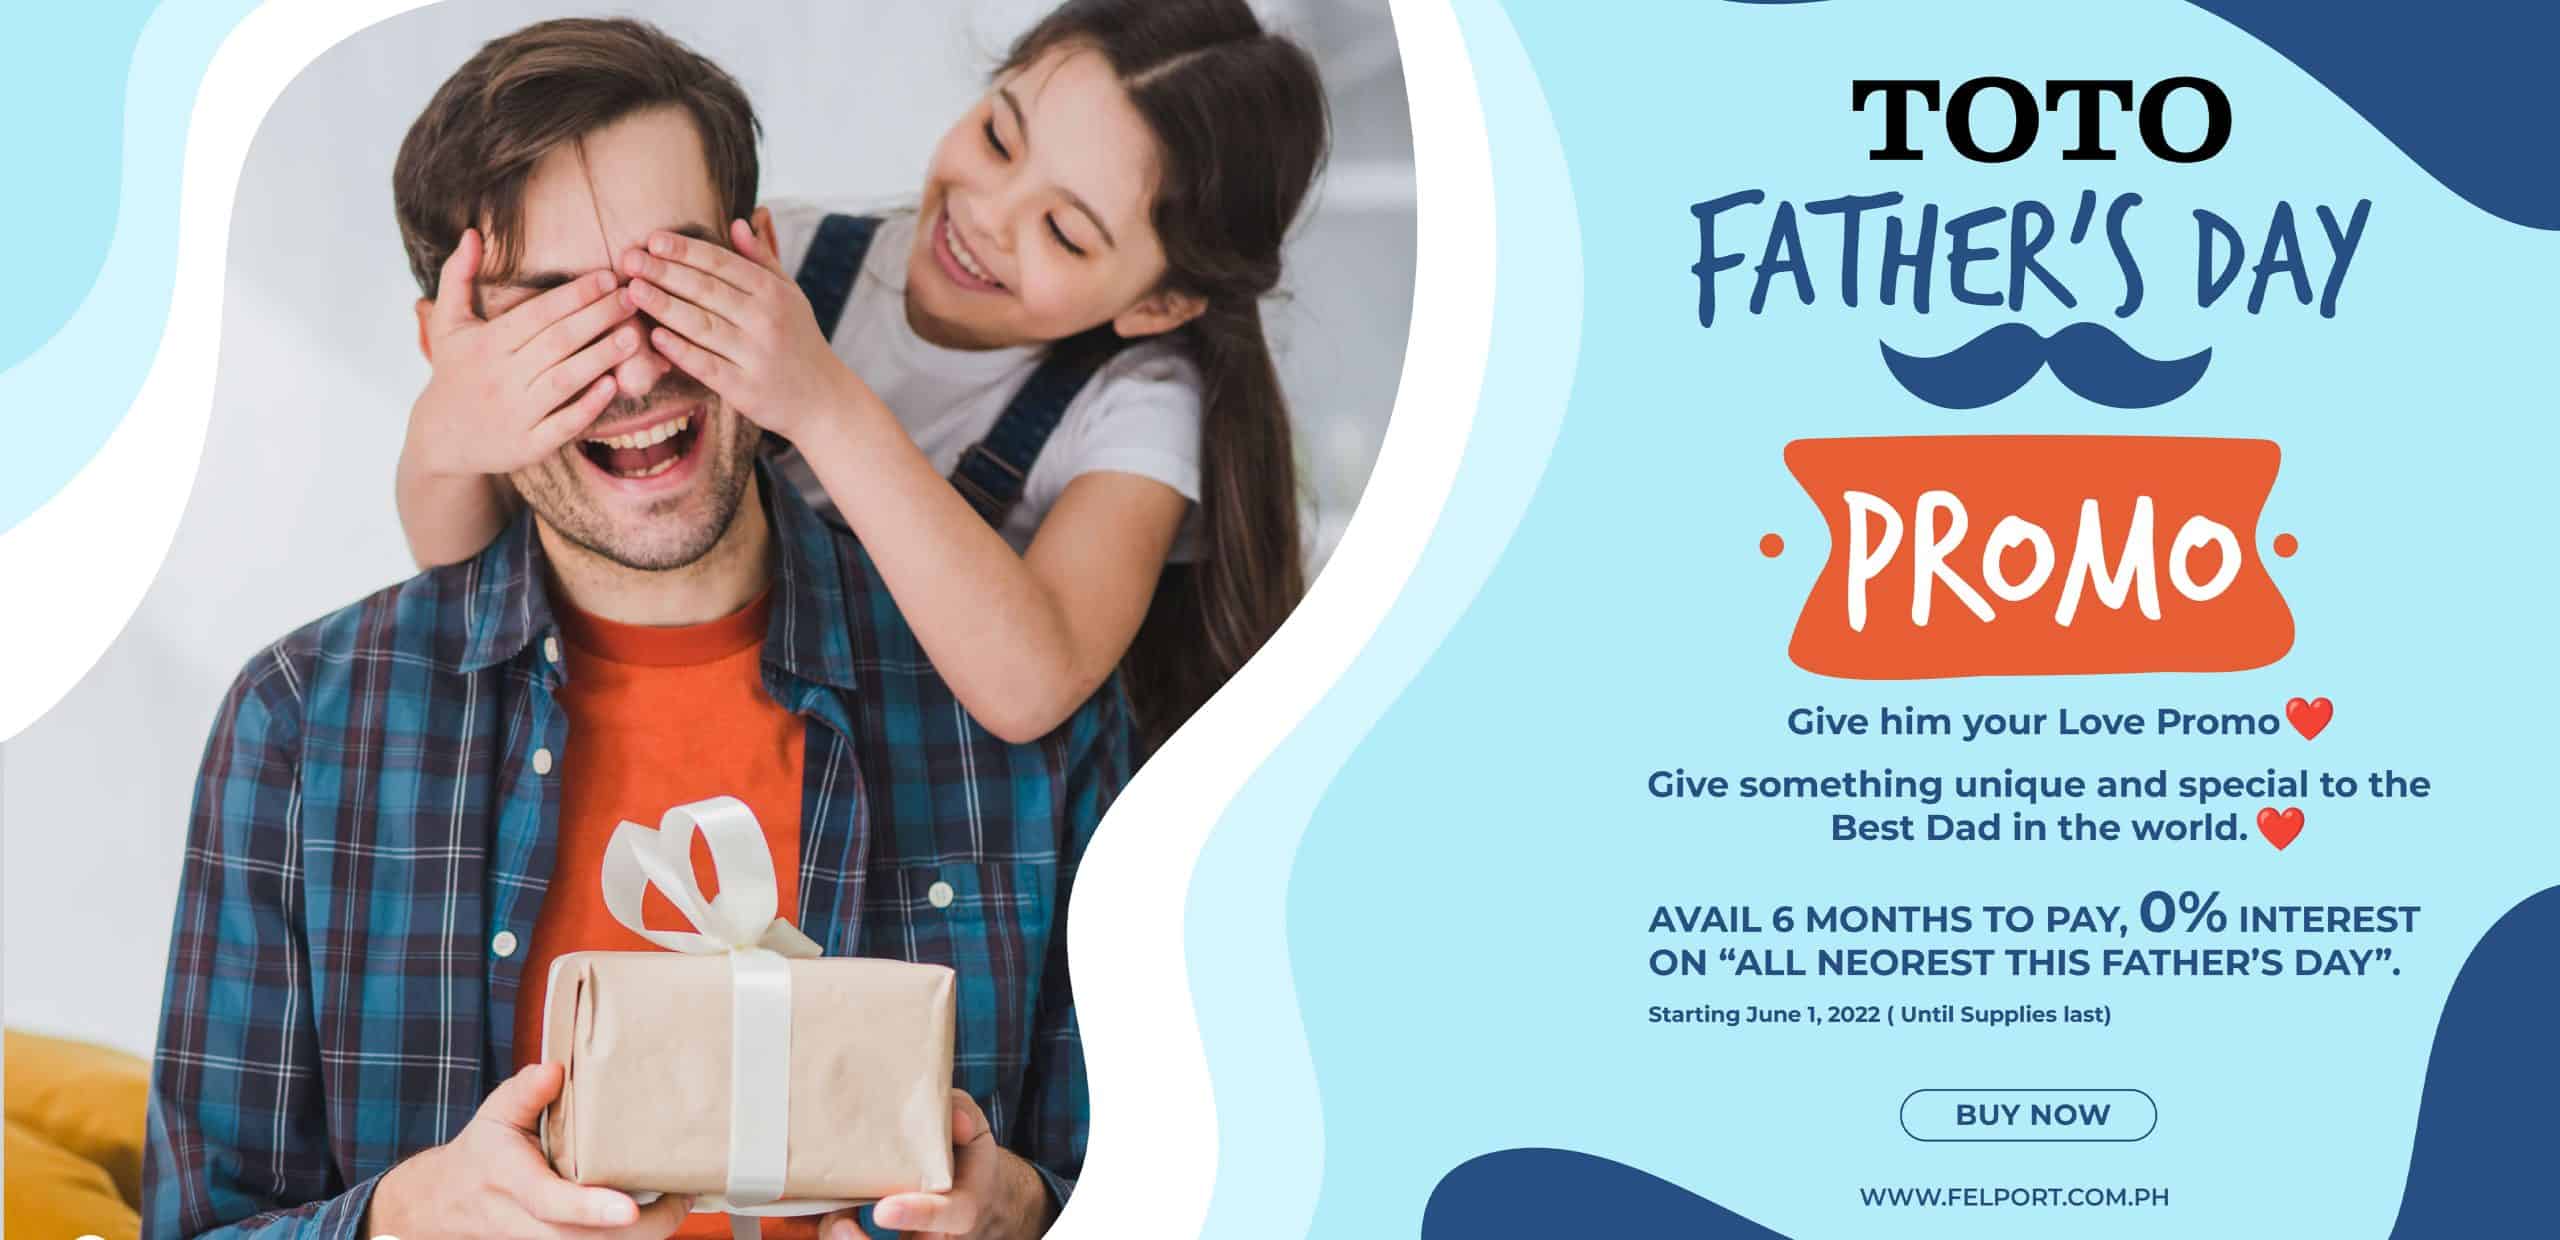 TOTO Fathers day promo